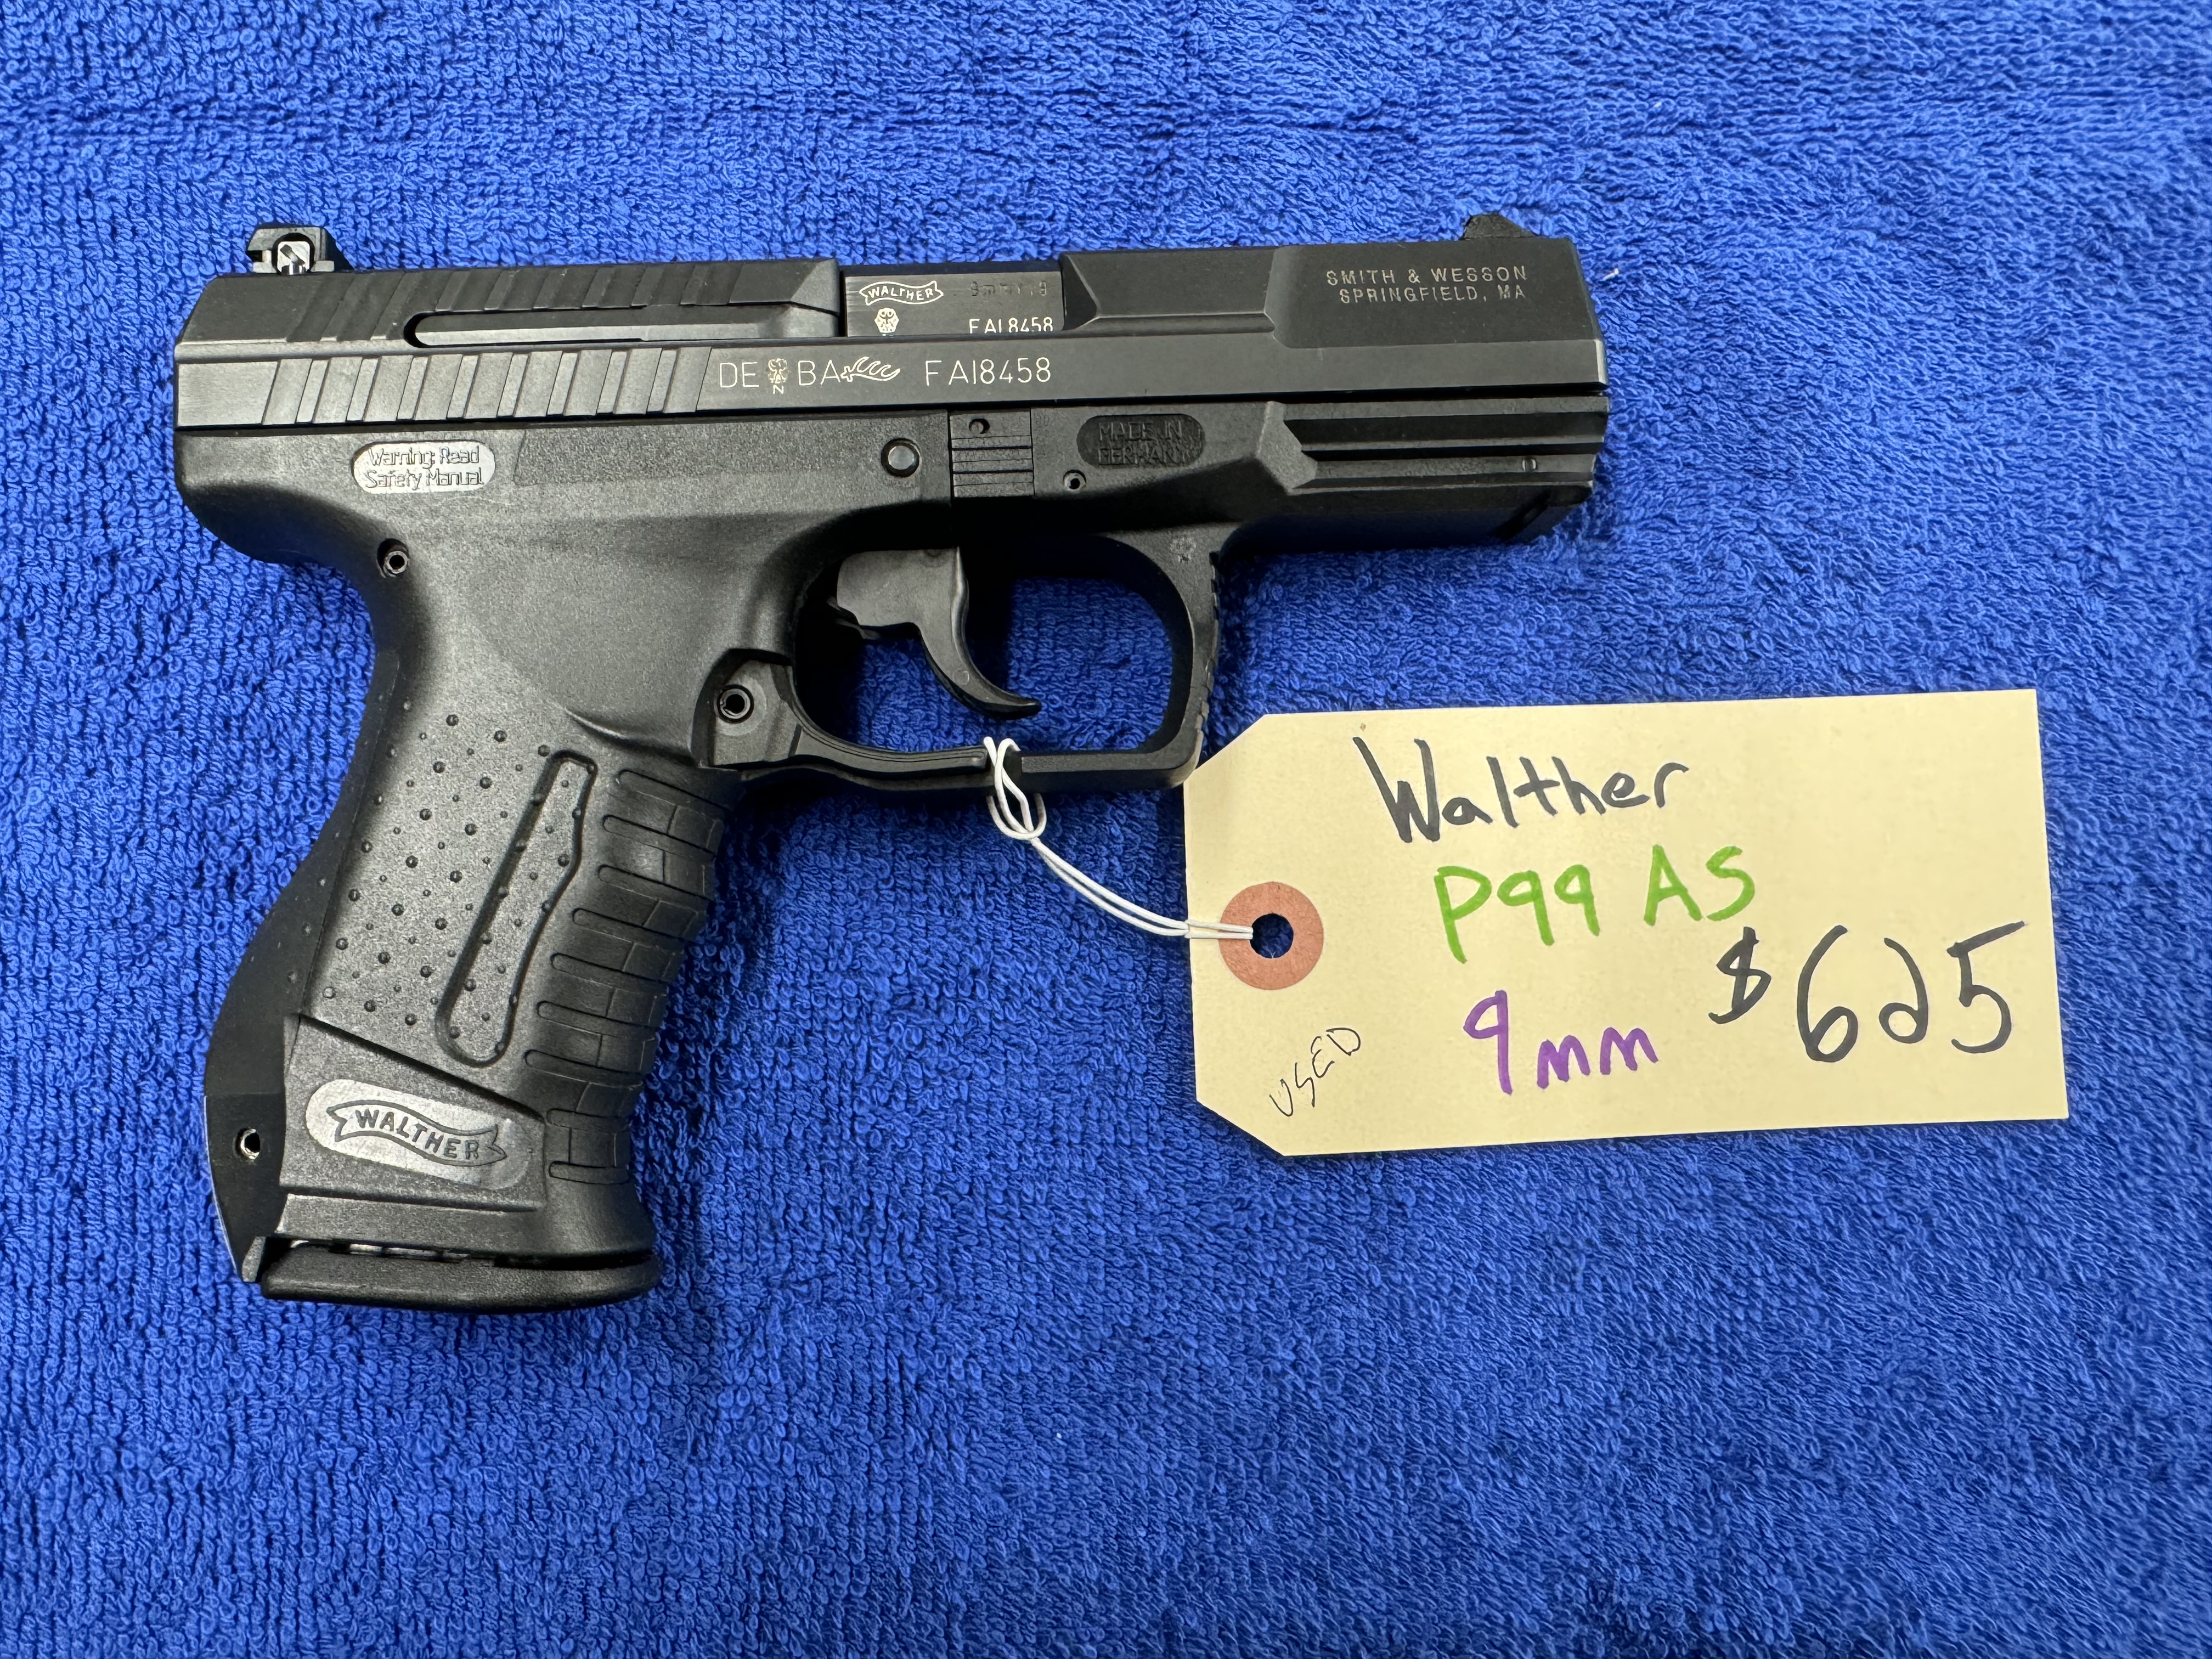 Walther p99 AS 9mm